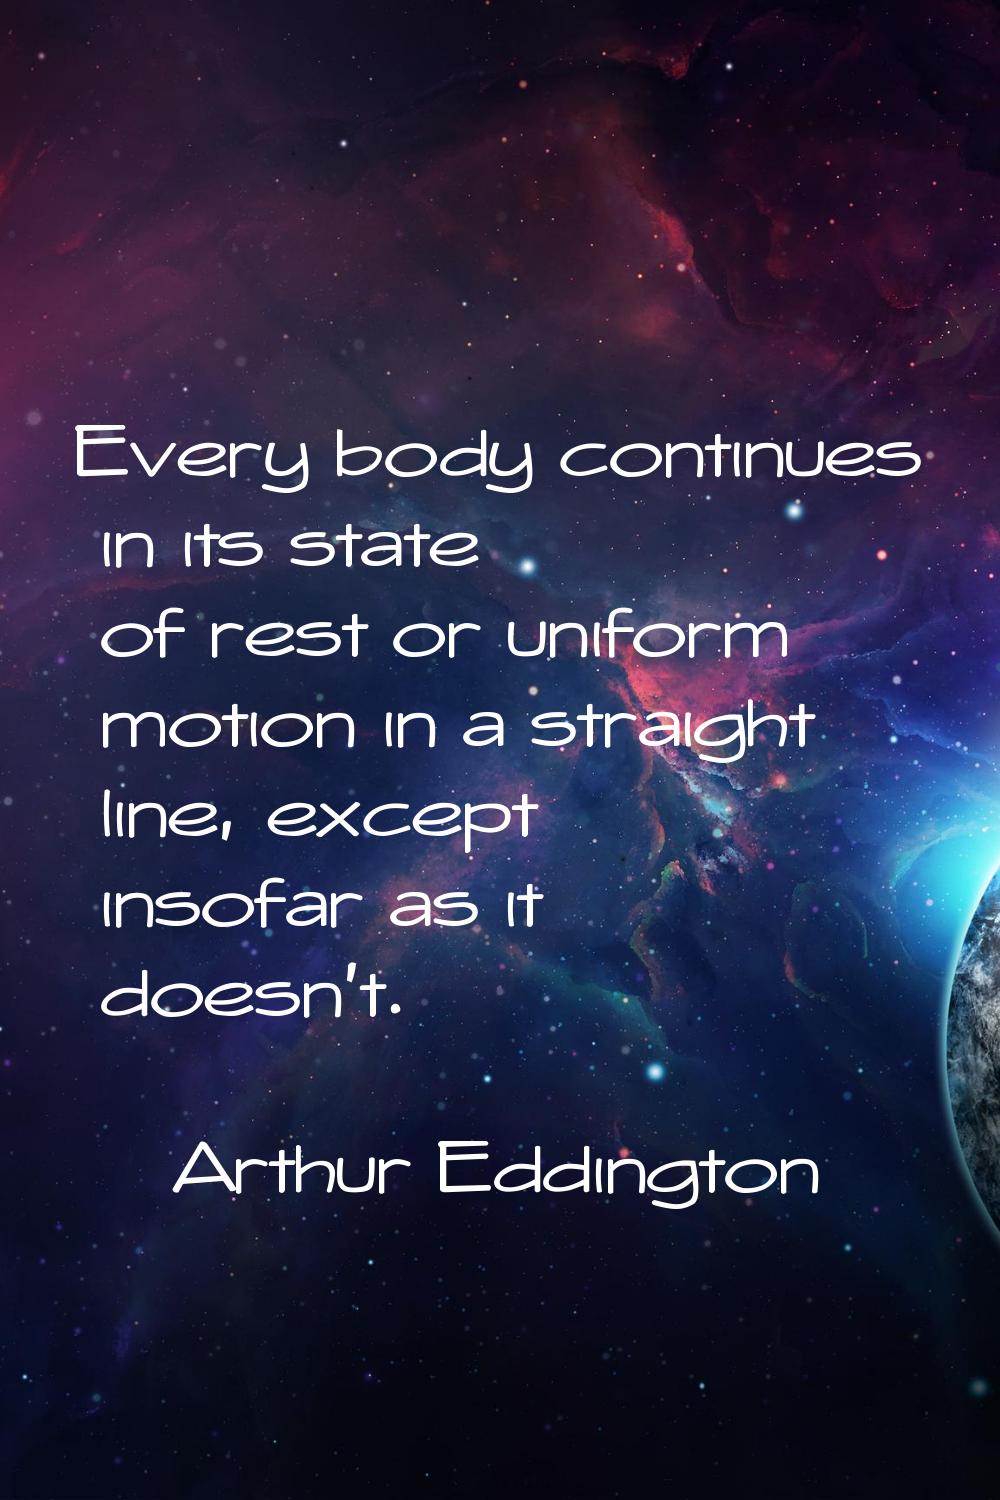 Every body continues in its state of rest or uniform motion in a straight line, except insofar as i